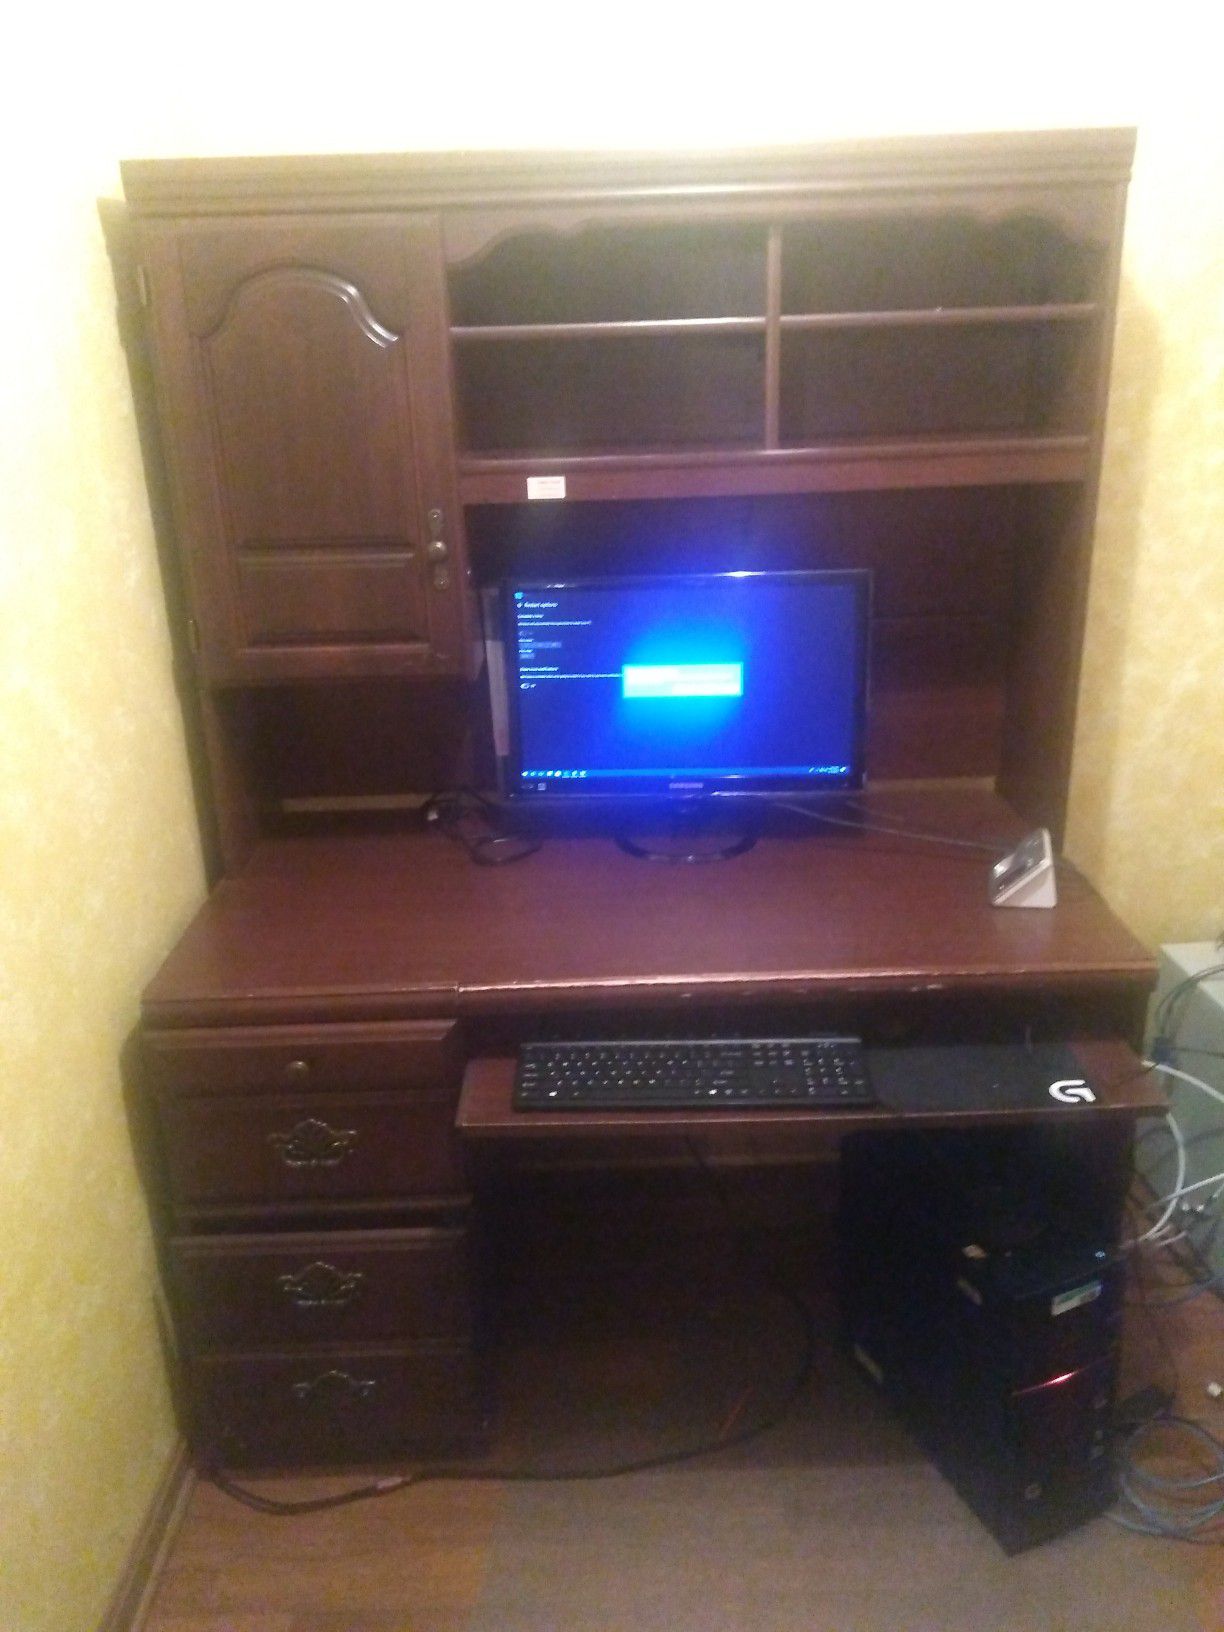 Computer desk with hutch